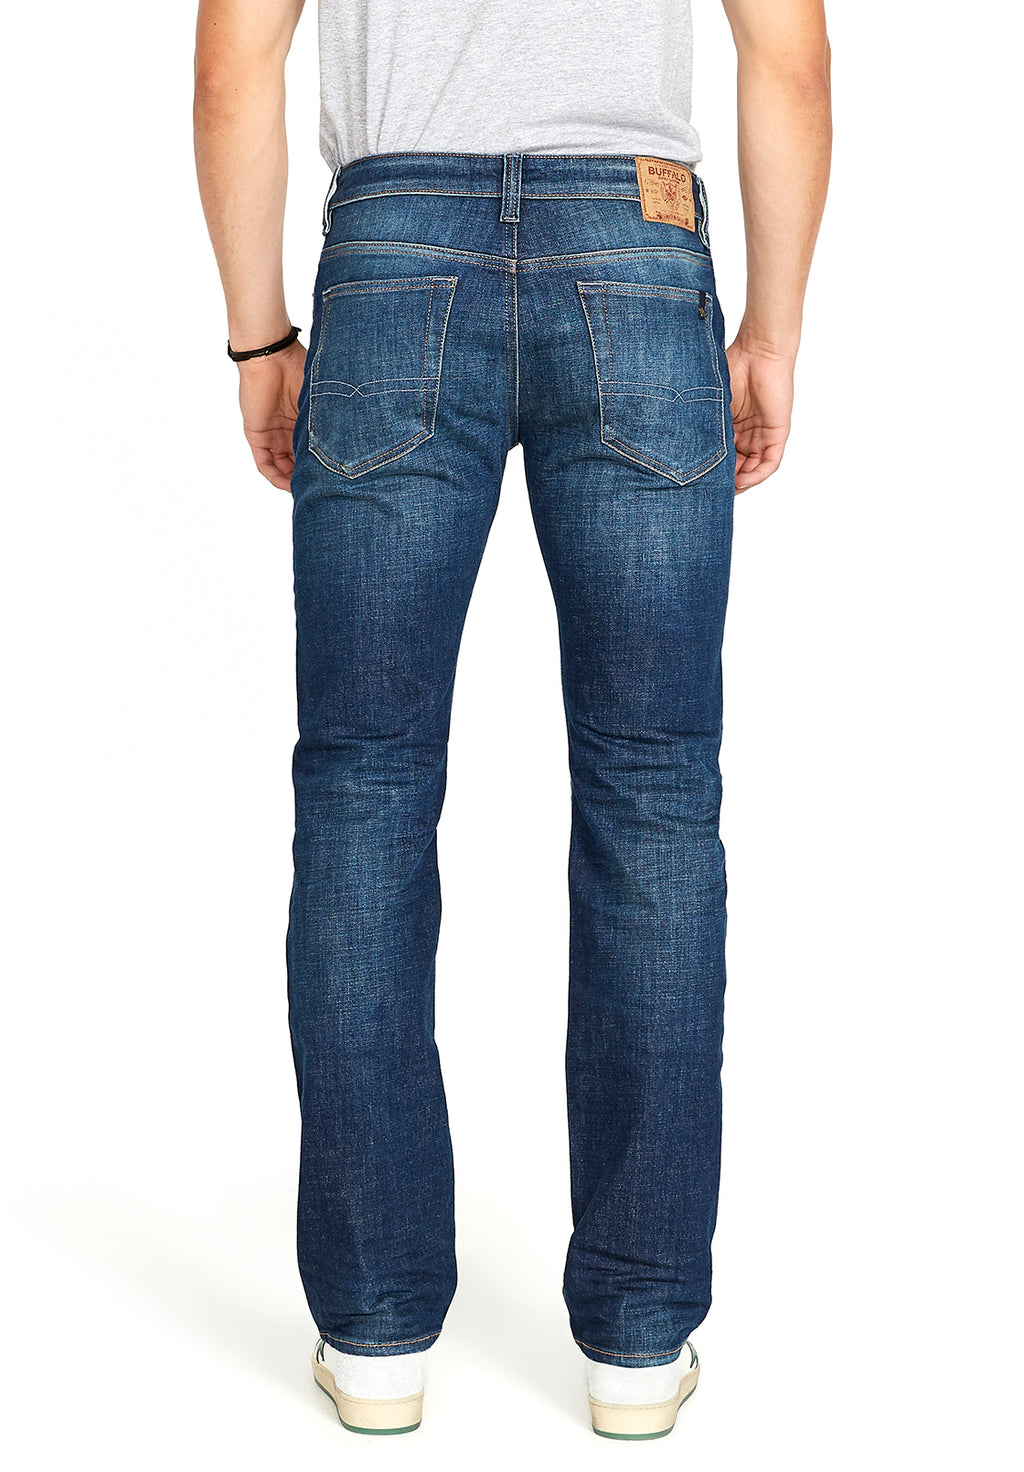 Relaxed Straight Driven Men's Jeans in Dark Blue Sanded – Buffalo Jeans ...